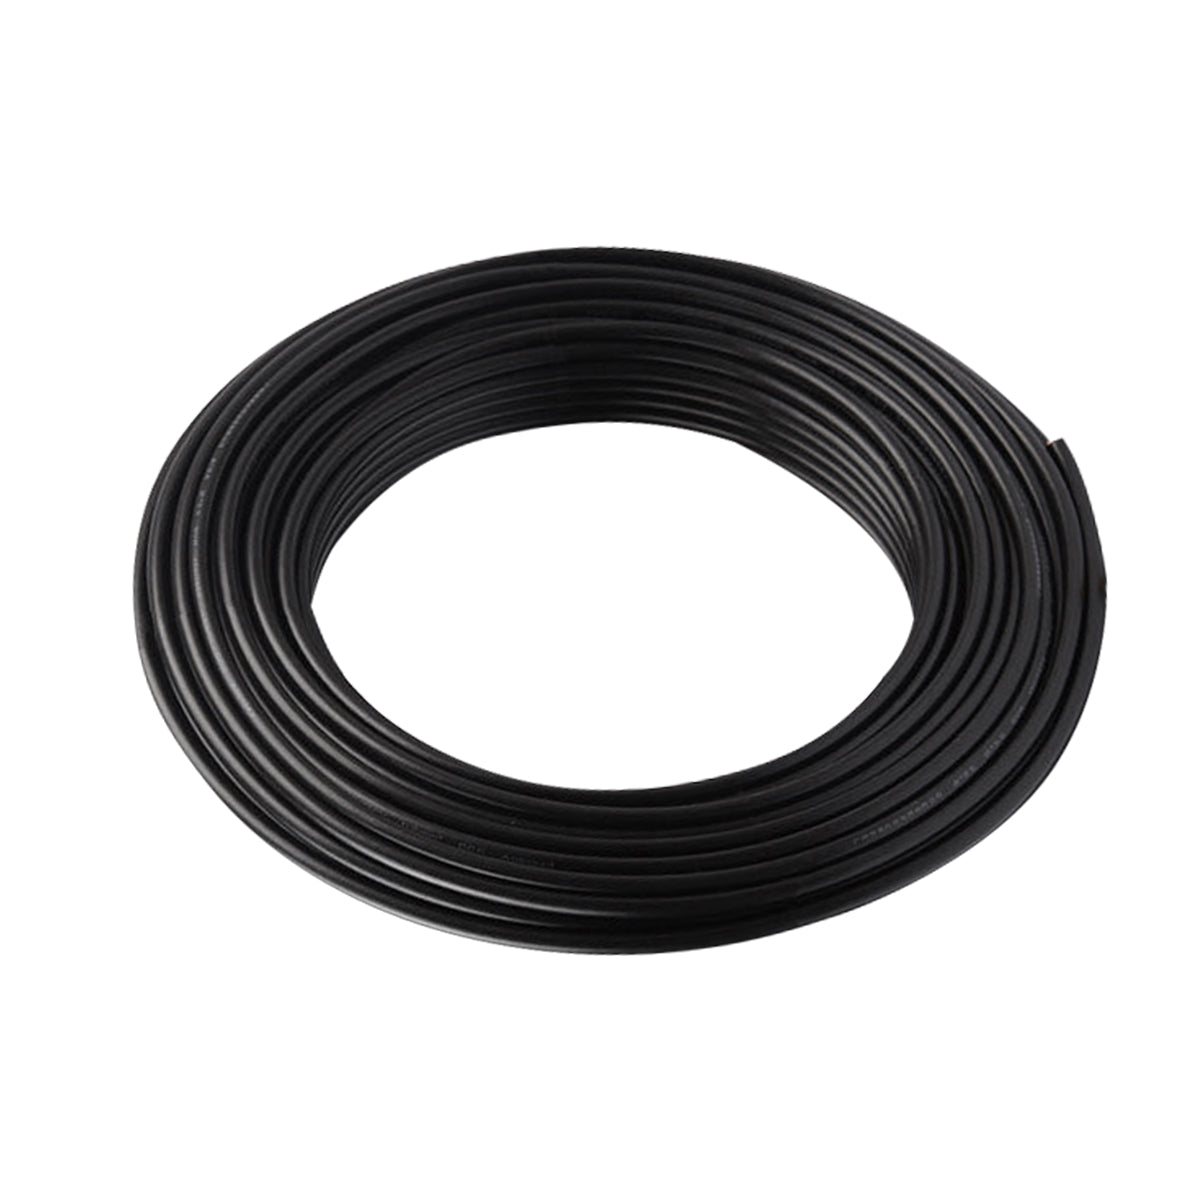 TOPENS 25FT Extension 5 Conductor Cable Original Core Wire for Gate Openers Arm Actuator Accessories 25 Feet Black